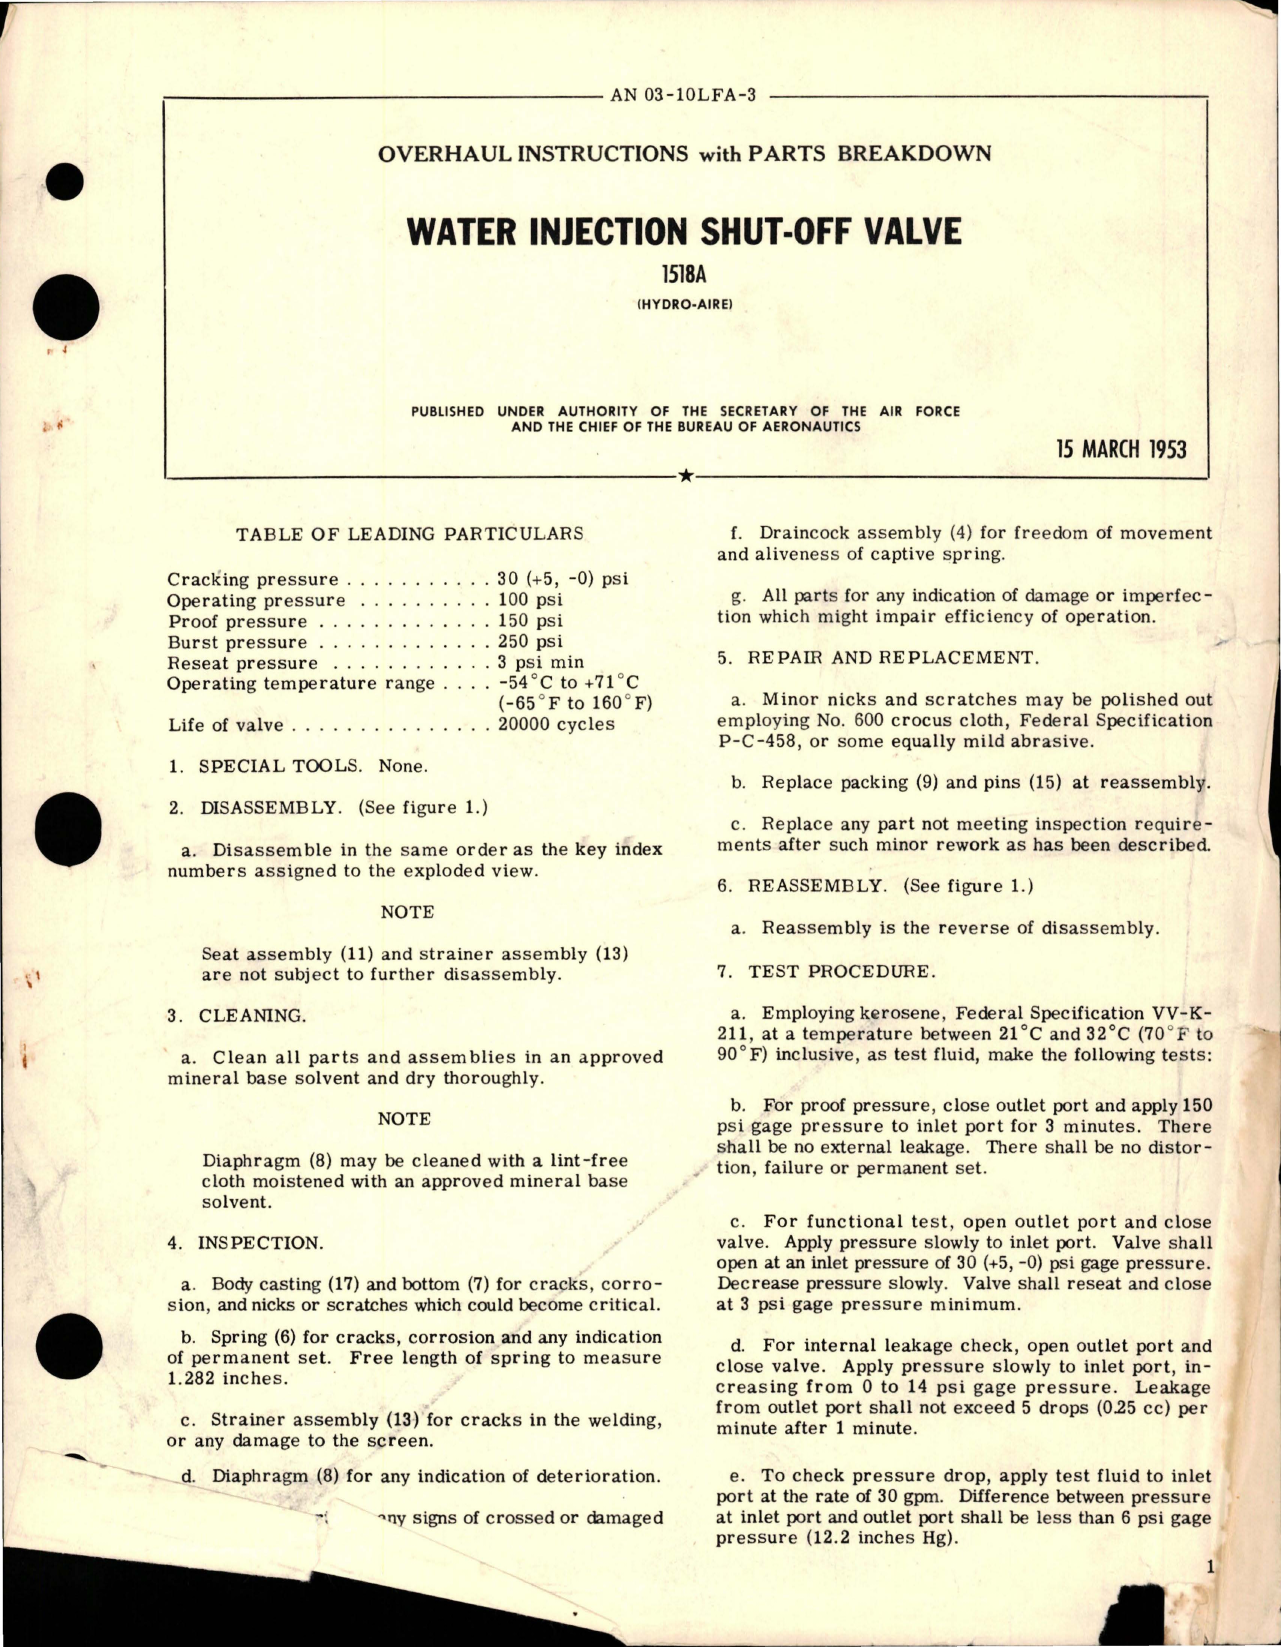 Sample page 1 from AirCorps Library document: Overhaul Instructions with Parts for Water Injection Shut Off Valve - 1518A